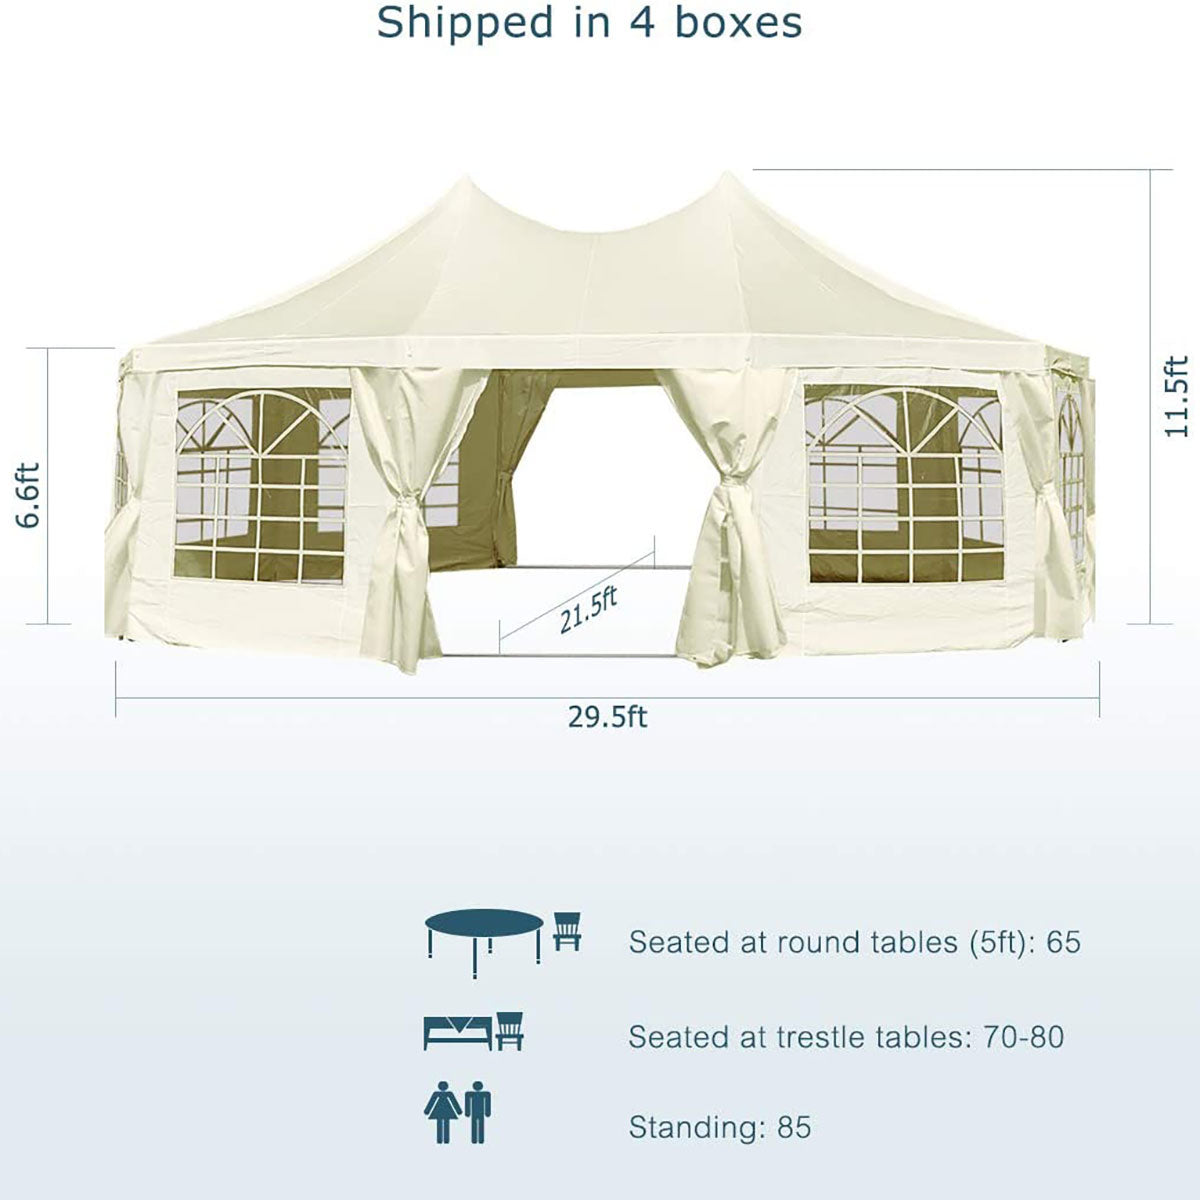 29' x 21' Party Tent size